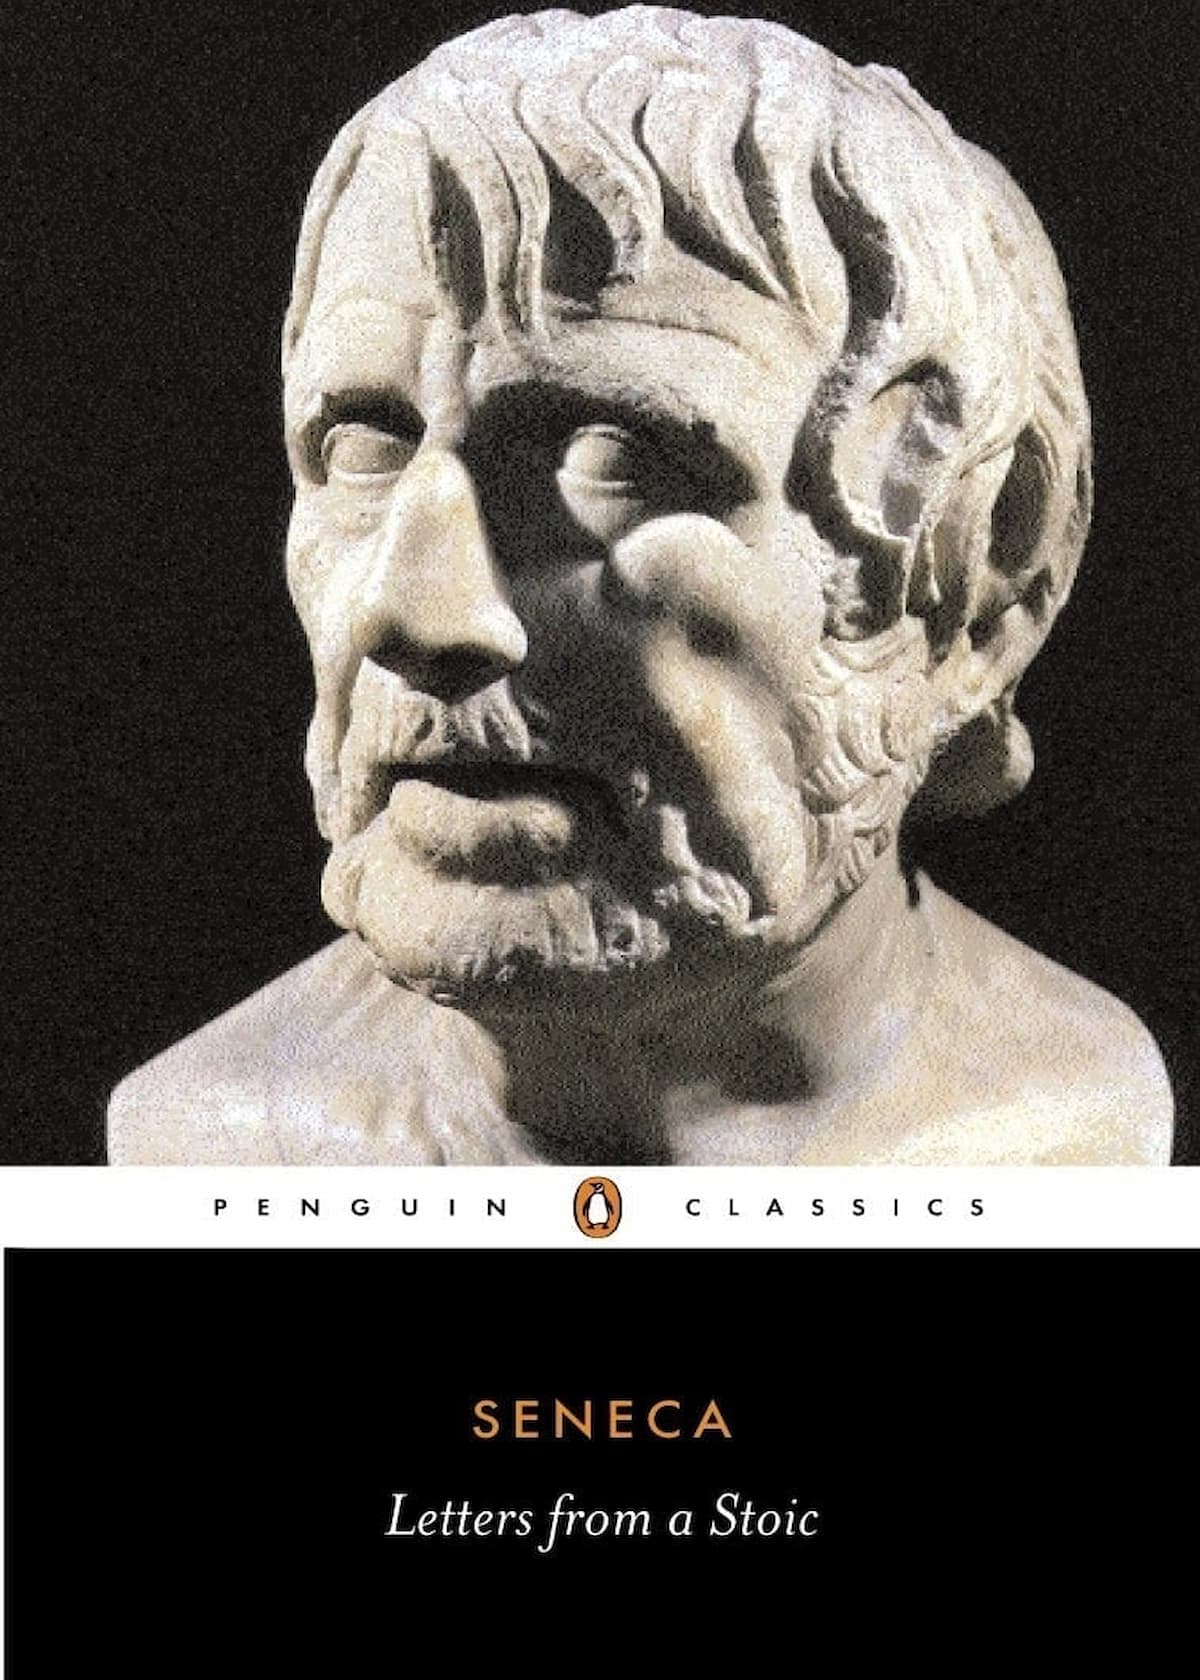 The Letters from a Stoic